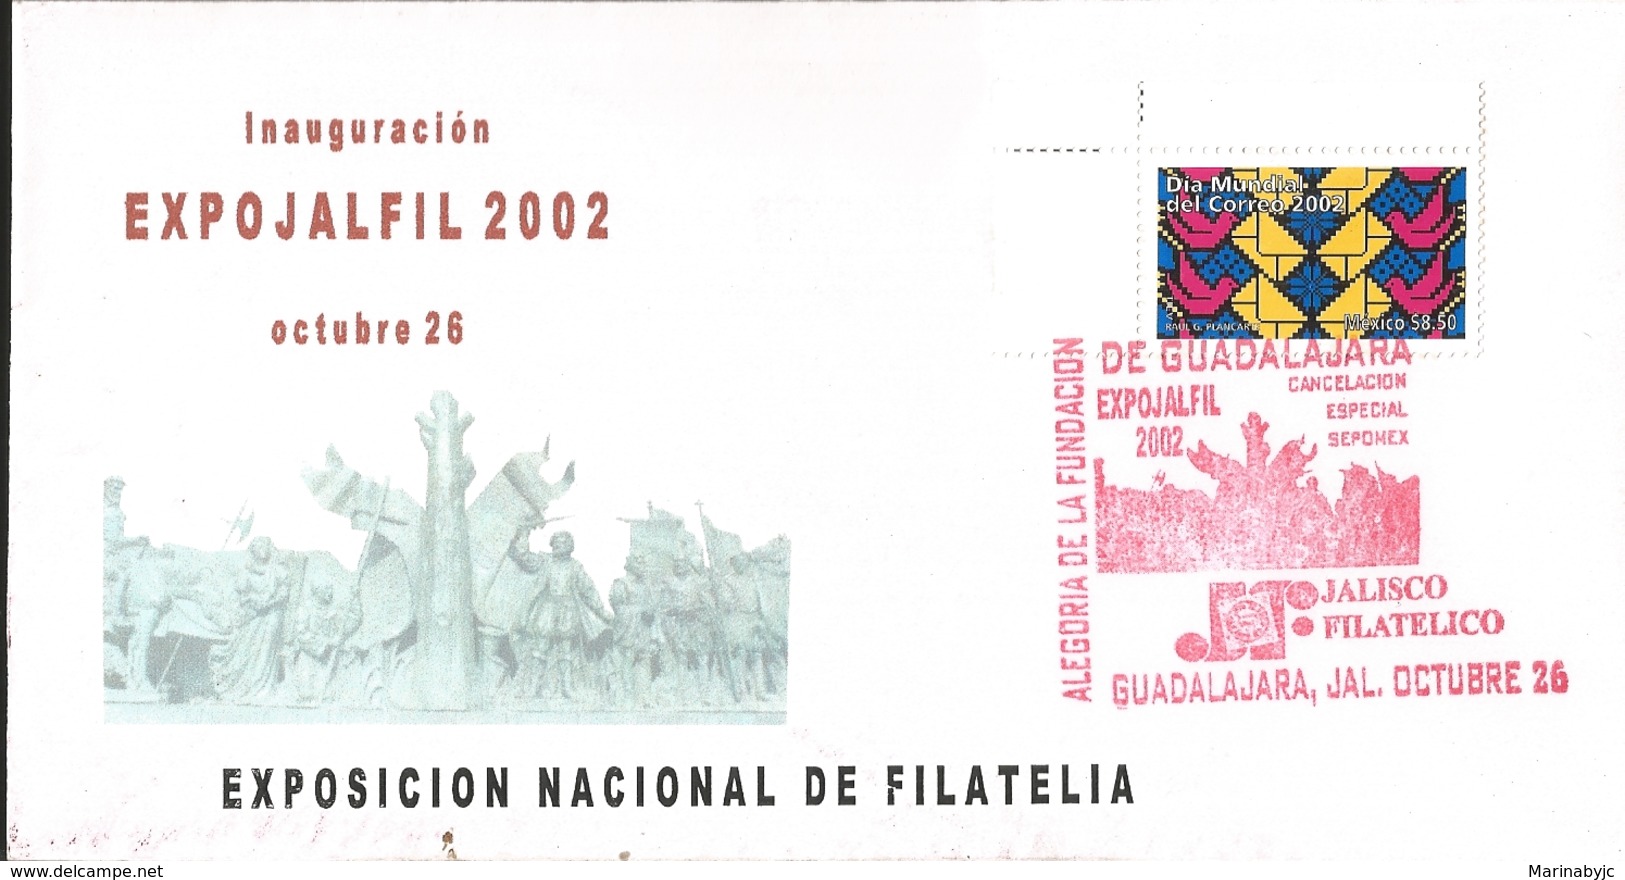 J) 2002 MEXICO, INAUGURATION EXPOJALFIL, NATIONAL PHILATELY EXHIBITION, SPECIAL CANCELLATION, FDC - Mexico